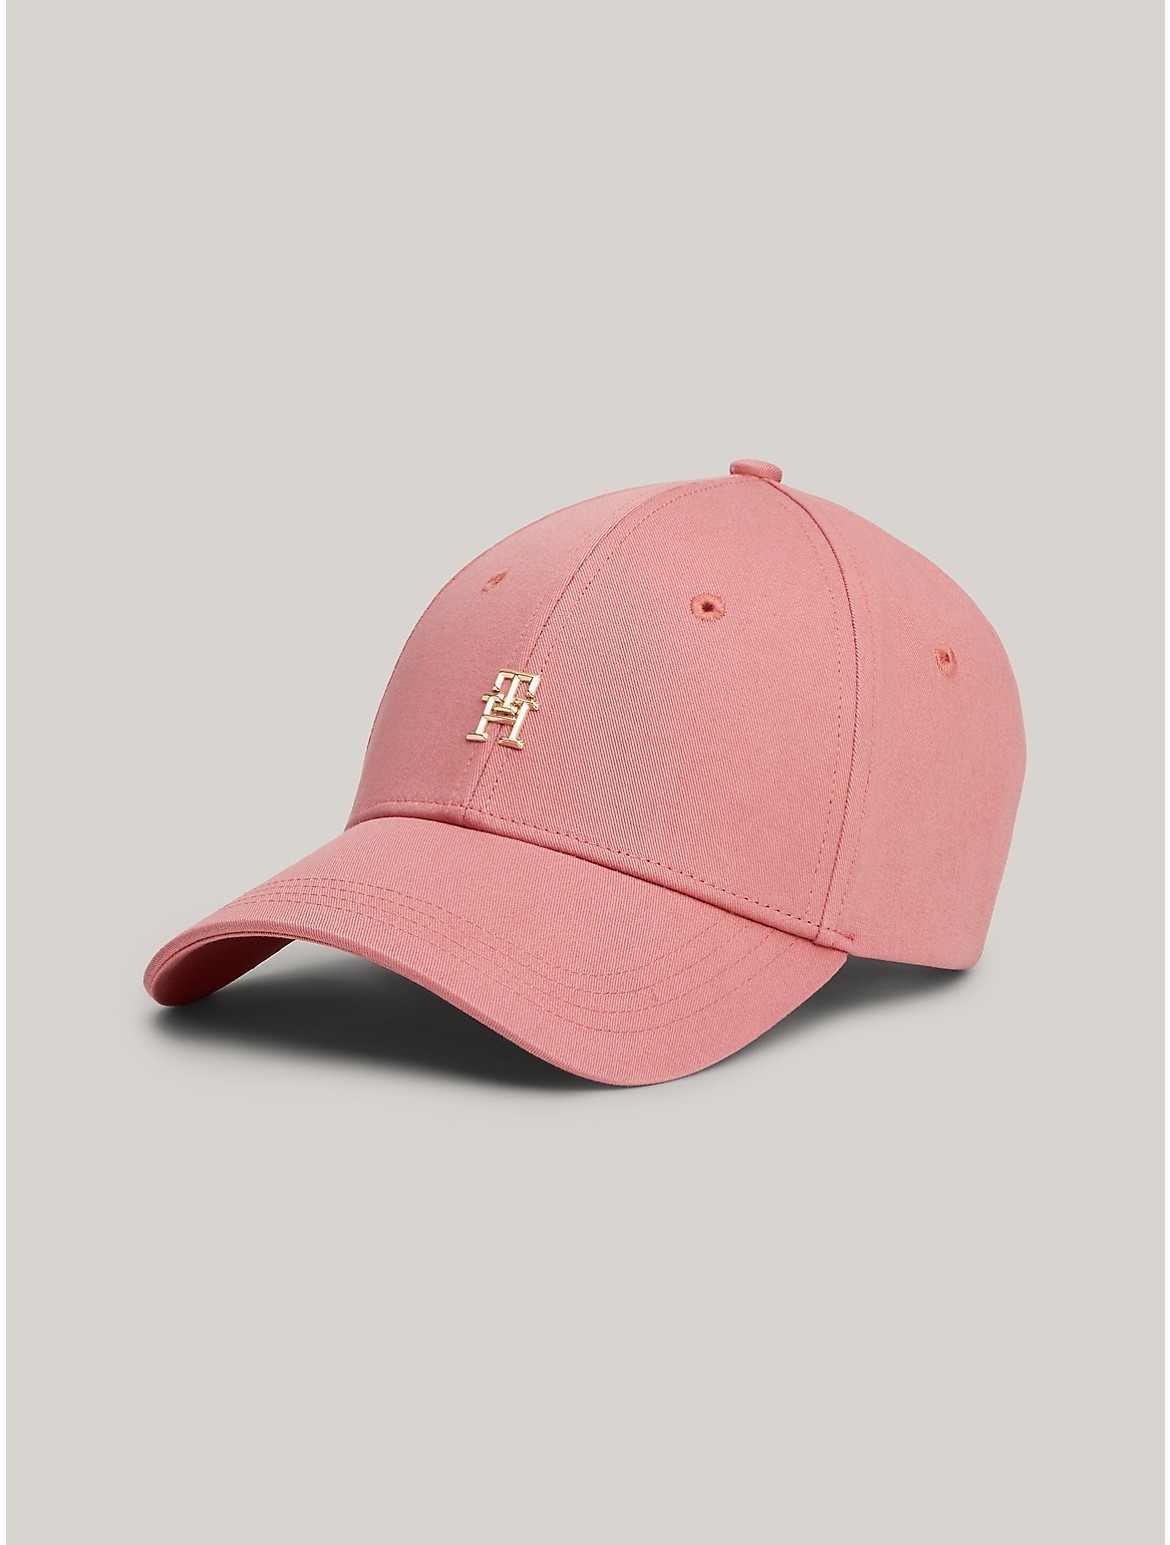 Tommy Hilfiger Monogram Plaque Cap In Teaberry Blossom